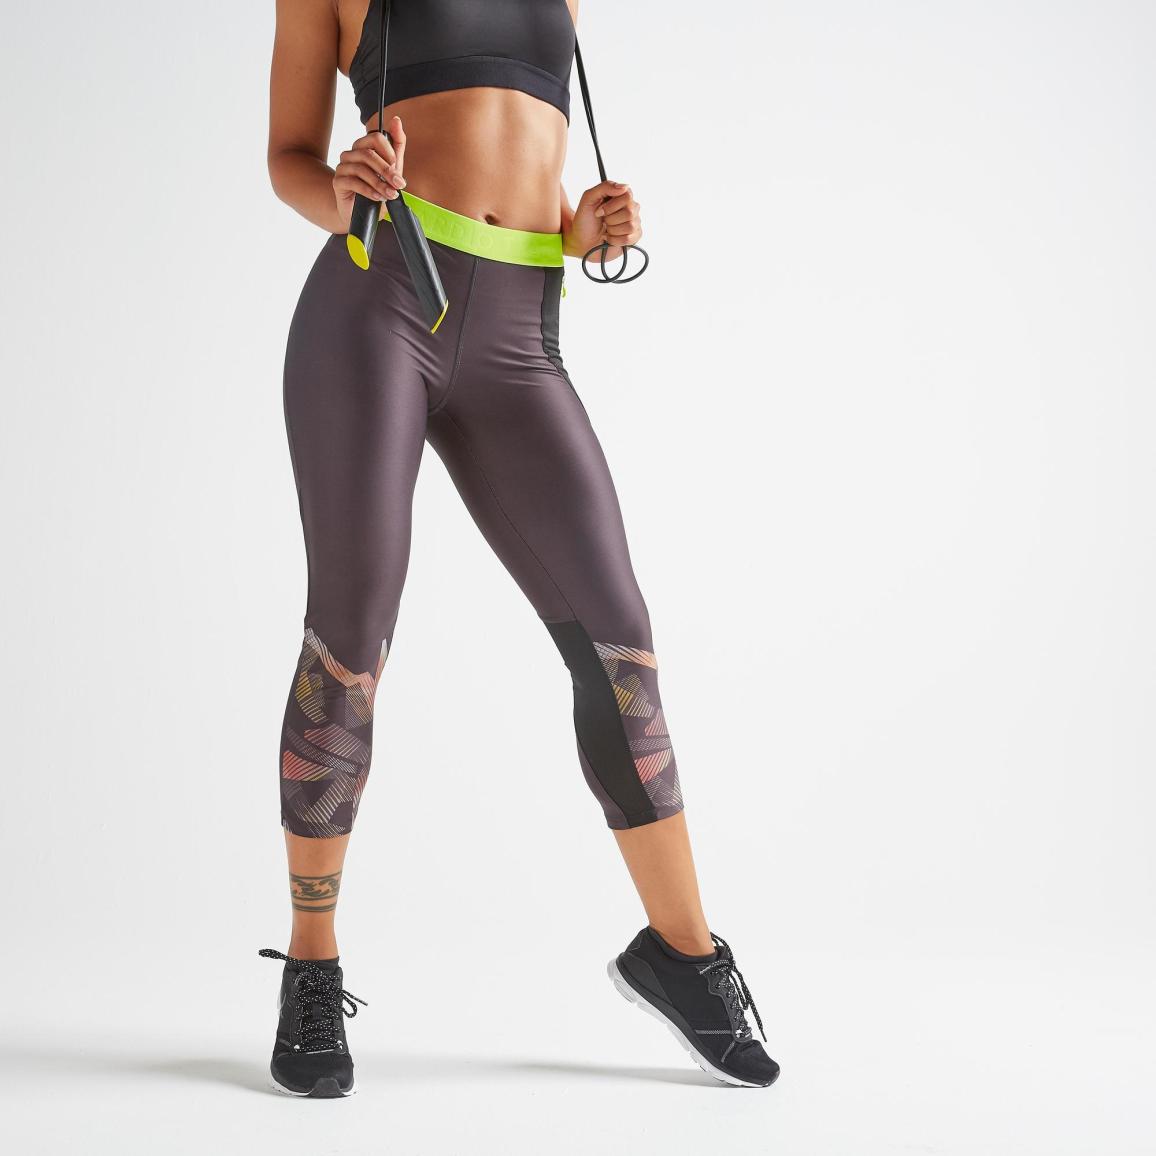 How Can I Care for My Fitness Leggings?